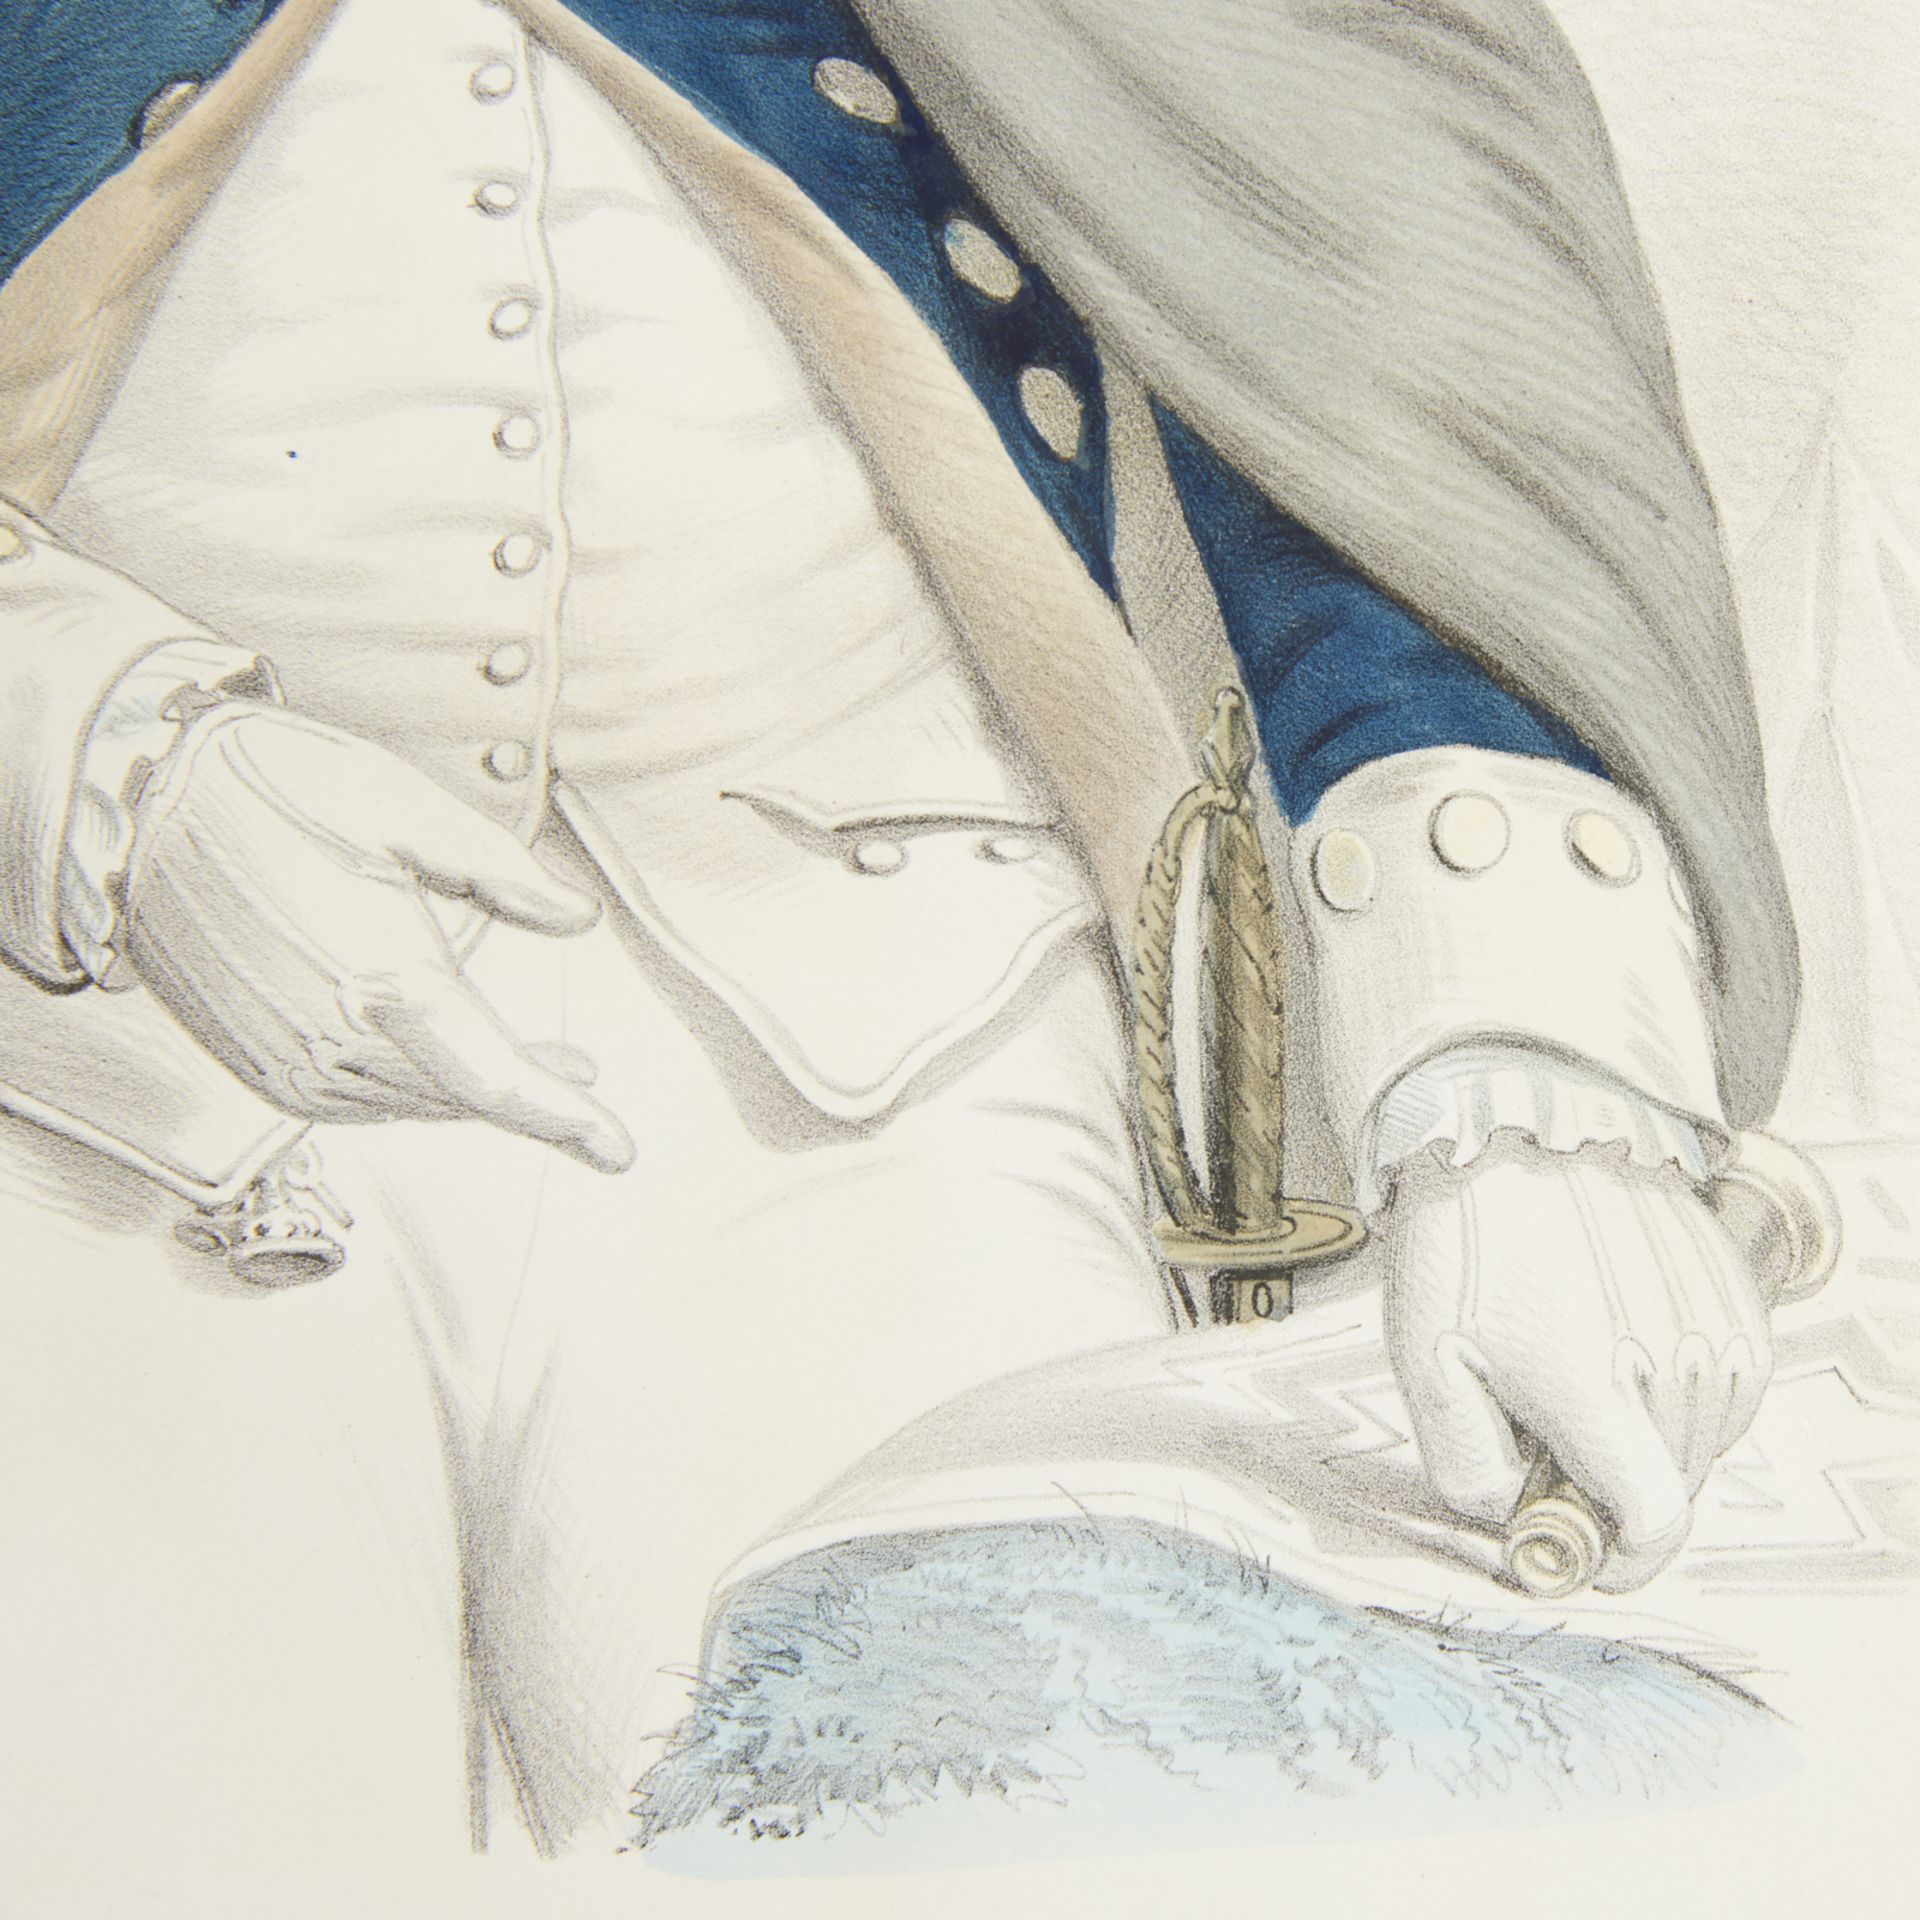 Currier & Ives "George Washington" Small Print - Image 4 of 6